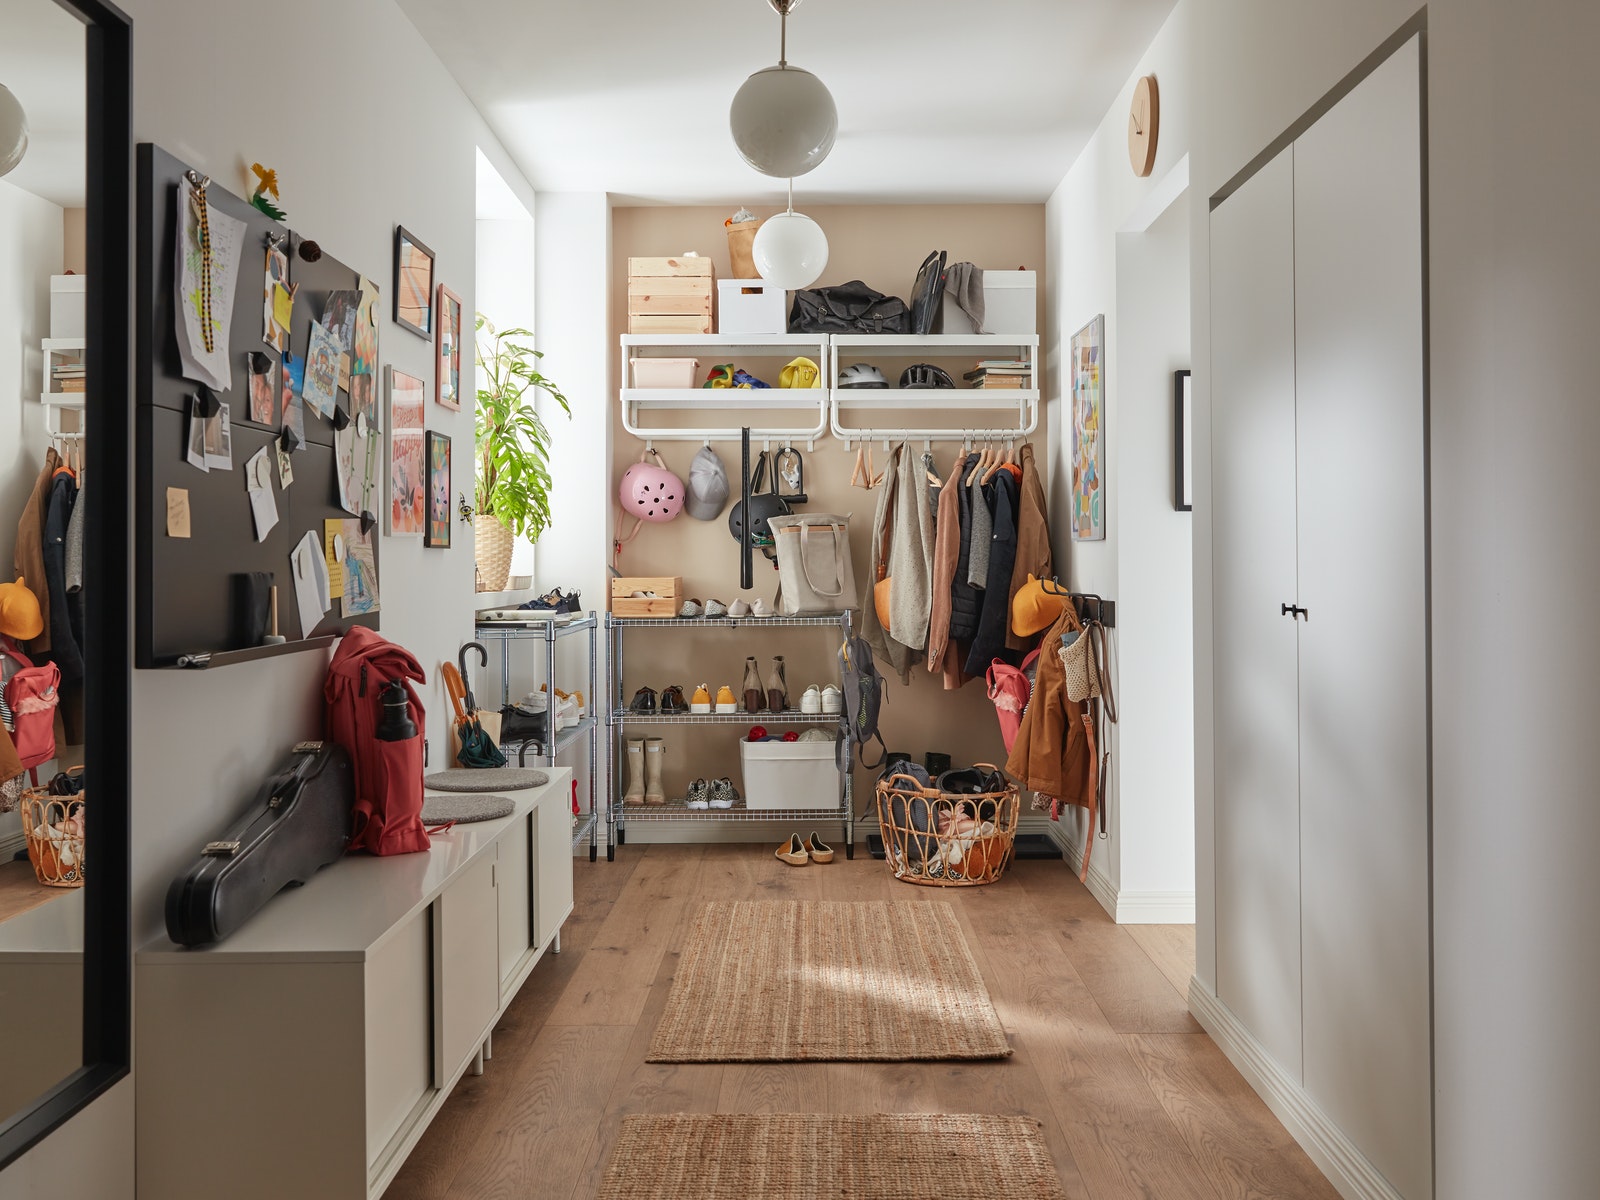 IKEA - A family hallway that makes getting ready easy